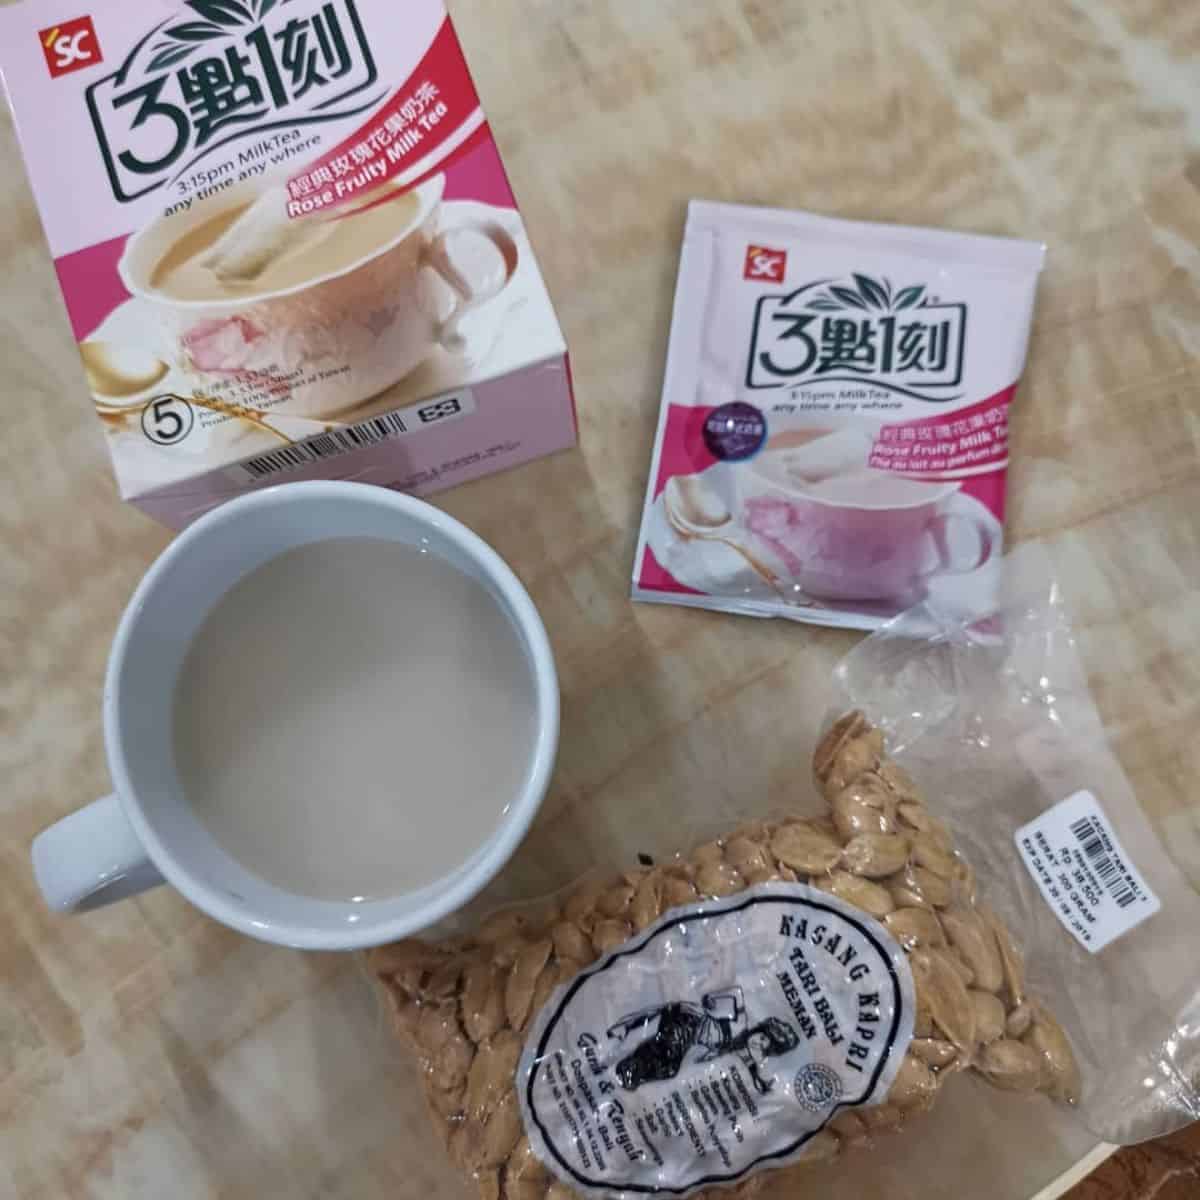 Delicious Rose fruity milk tea powder drink from 315